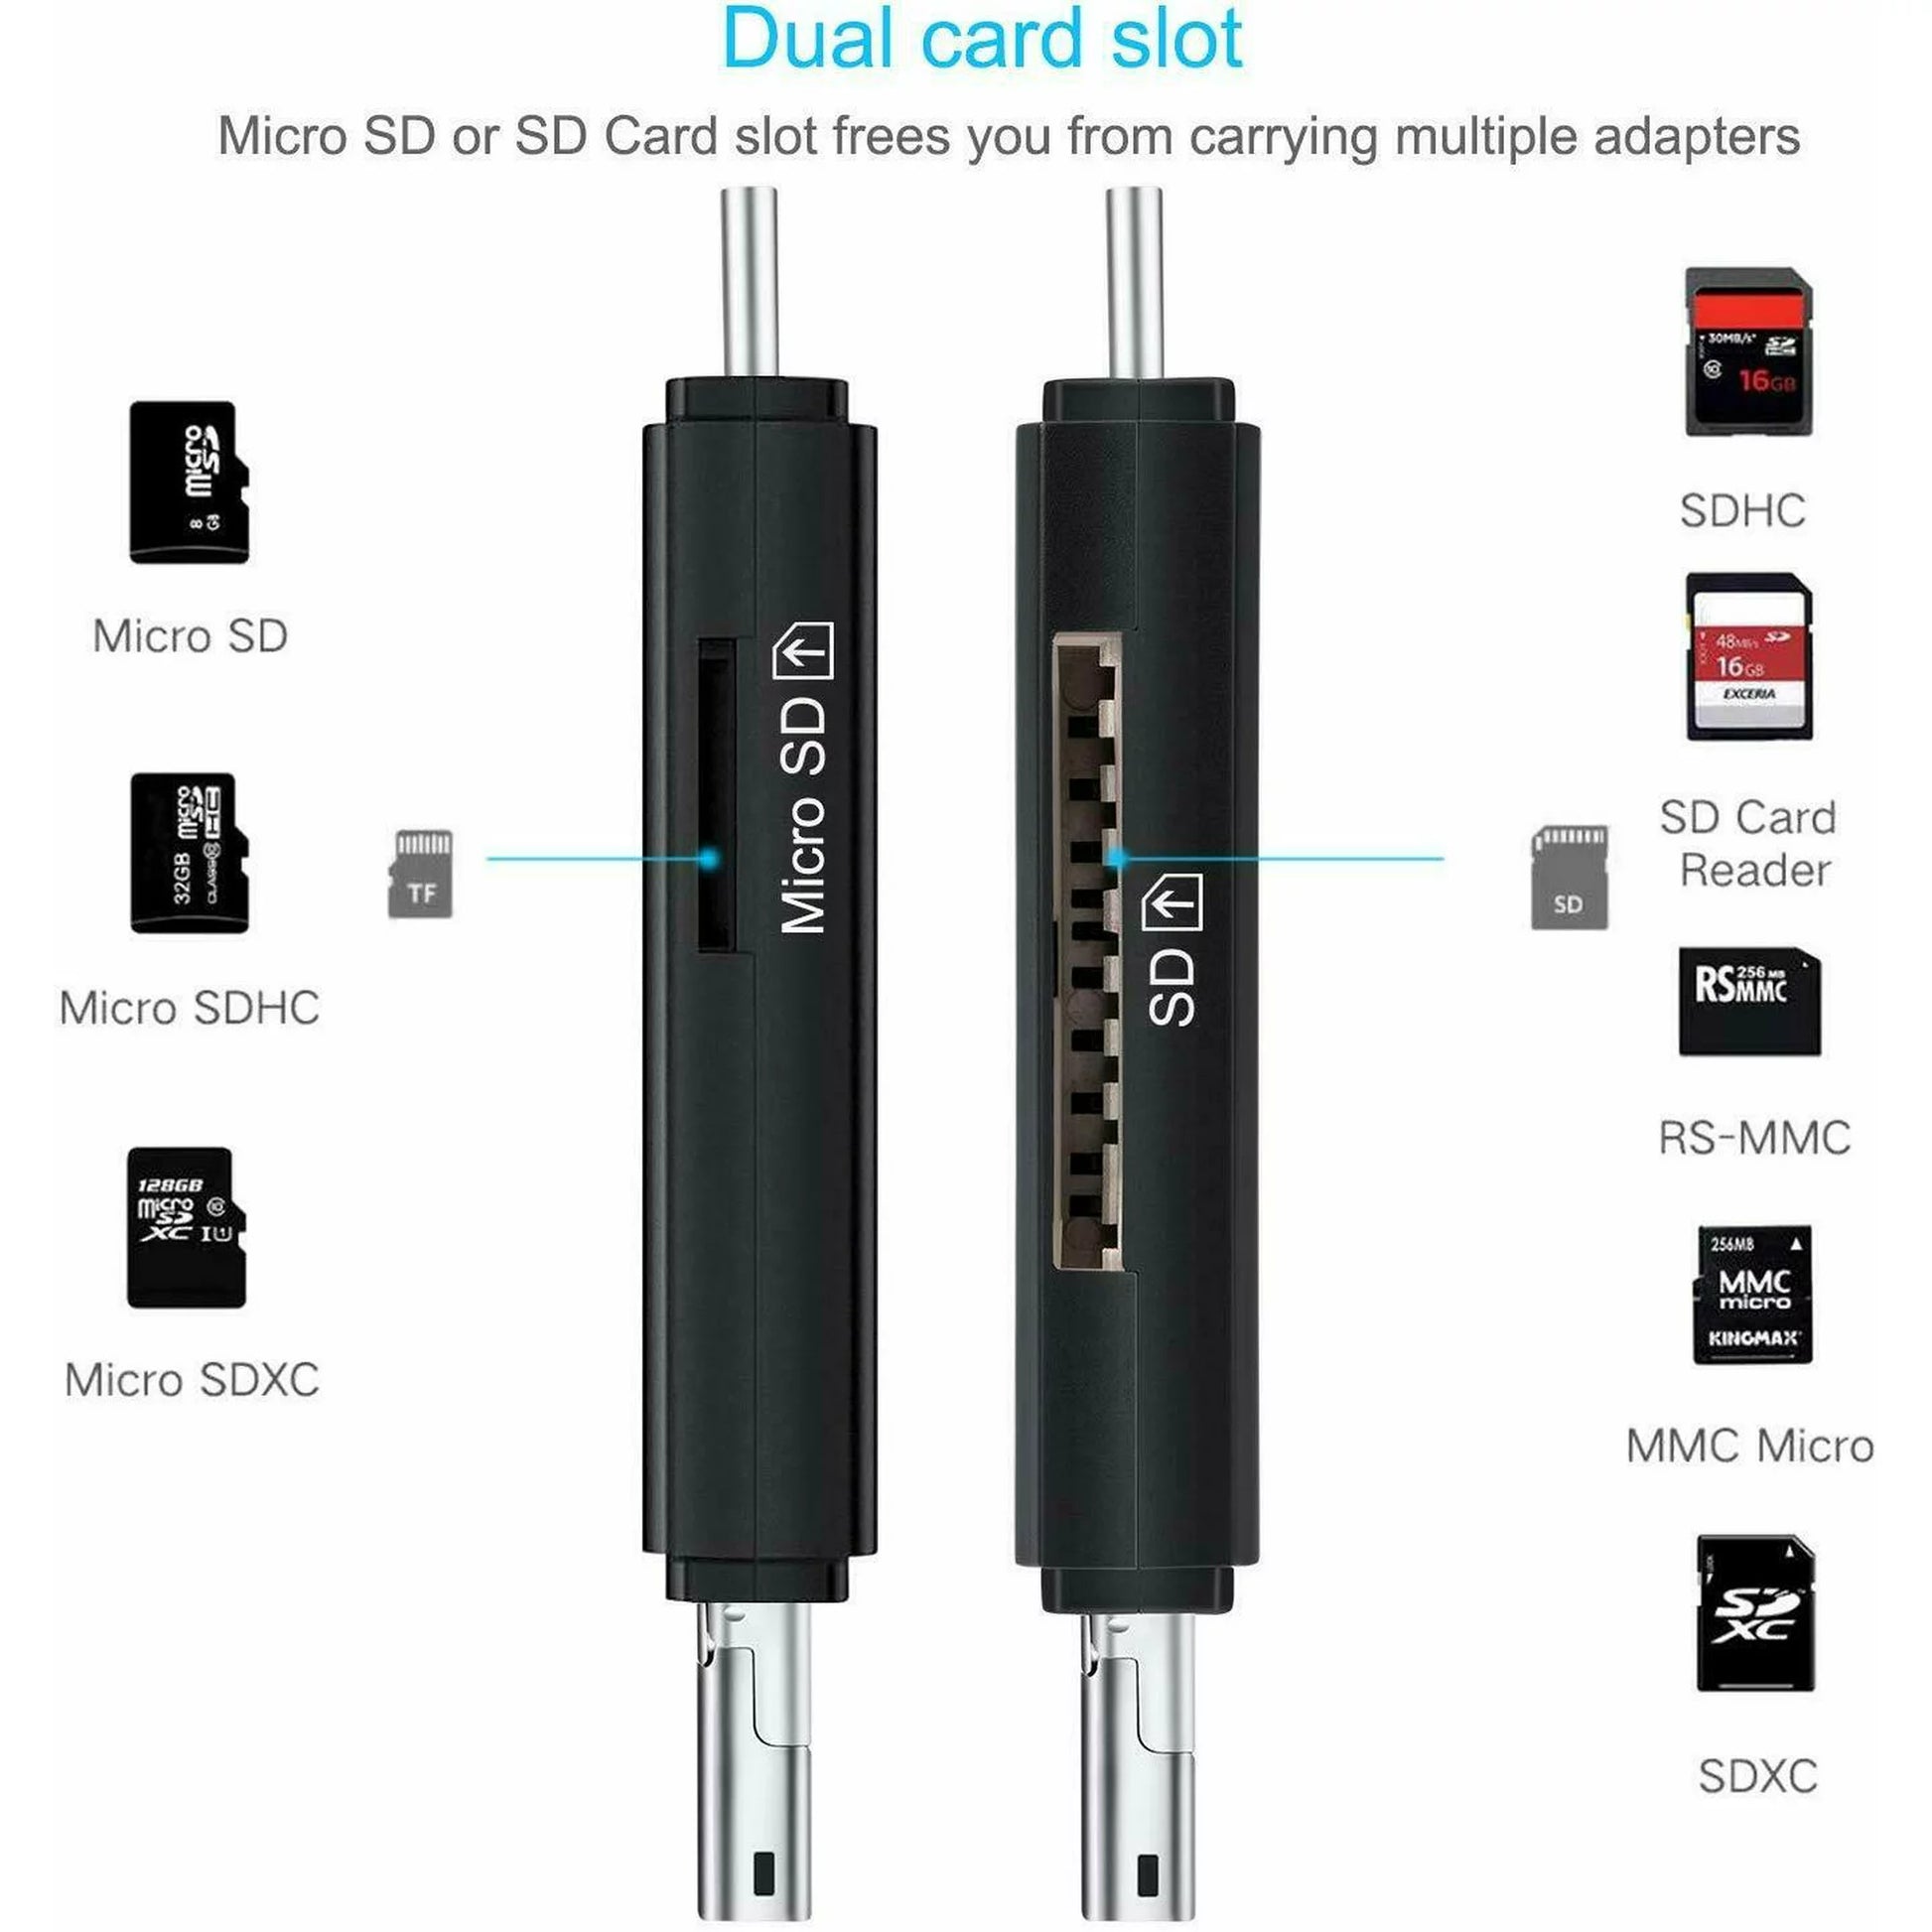 3-in-1 Type C Card Reader: USB 2.0 Portable Memory Card Reader and Micro USB to USB C OTG Adapter for SDXC, SDHC, SD, MMC, RS-MMC, Micro SDXC, Micro SD, Micro SDHC, and UHS-I Cards - CALCUMART